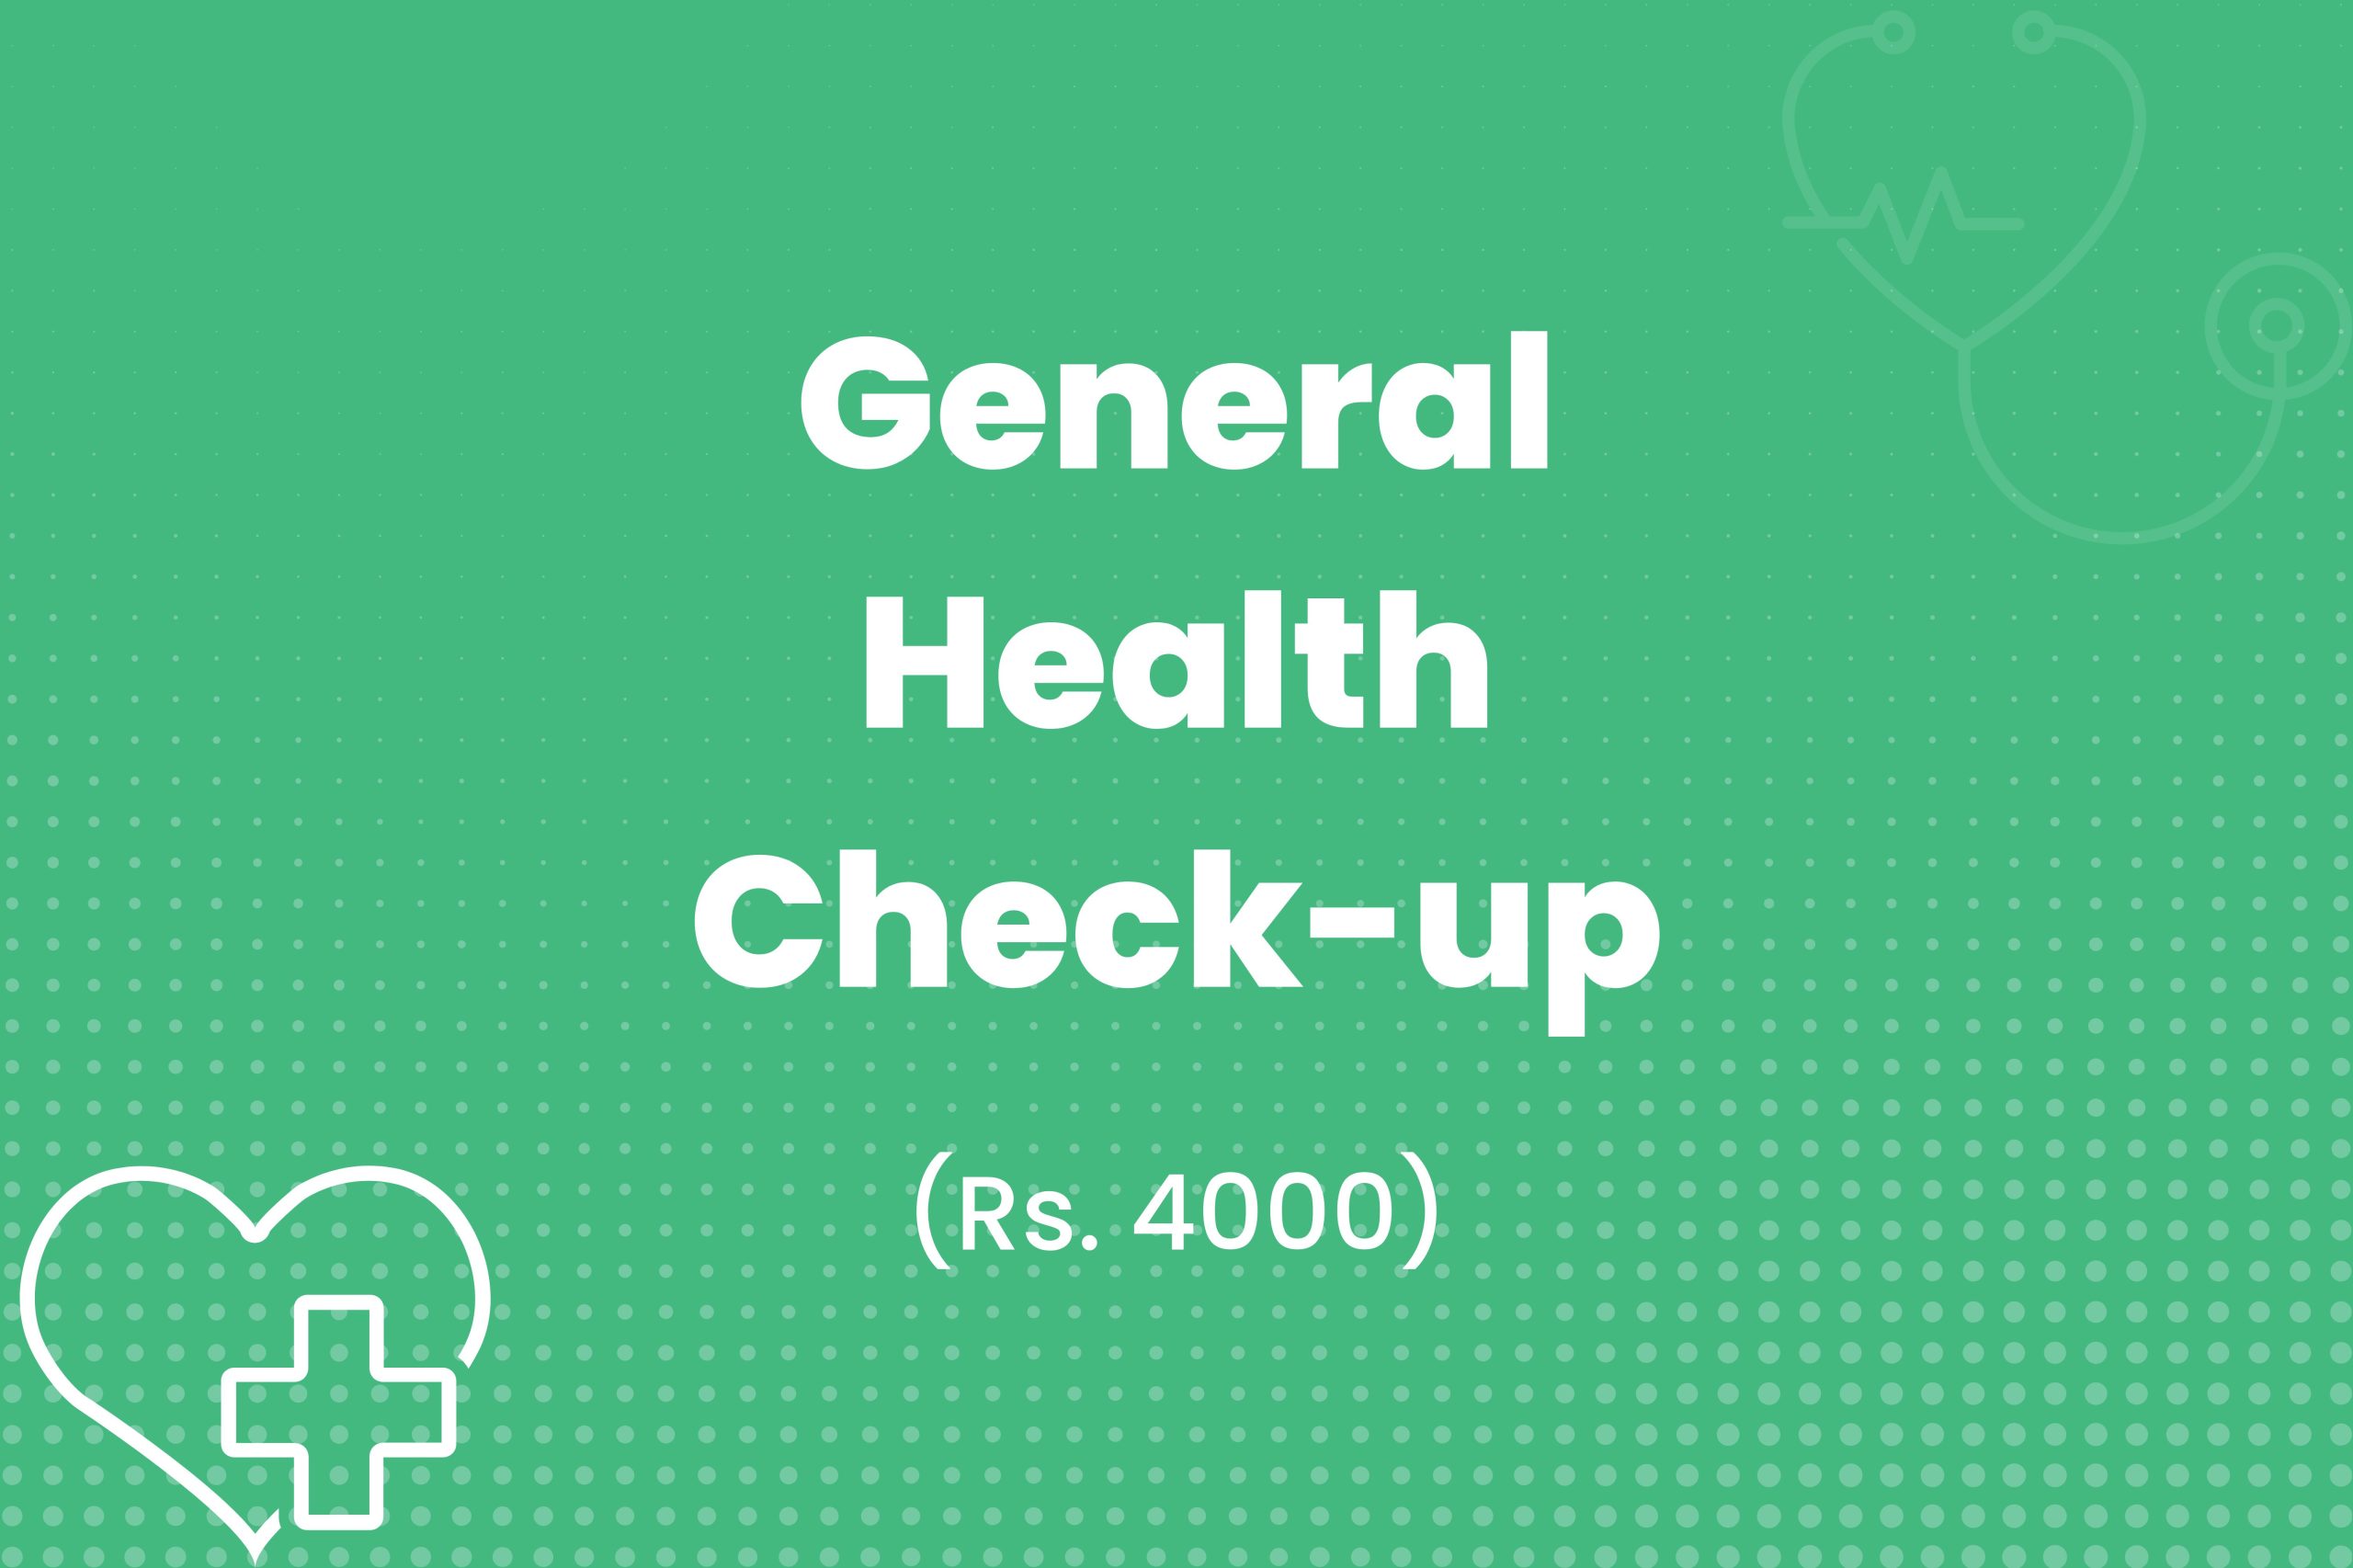 General Health Check-up